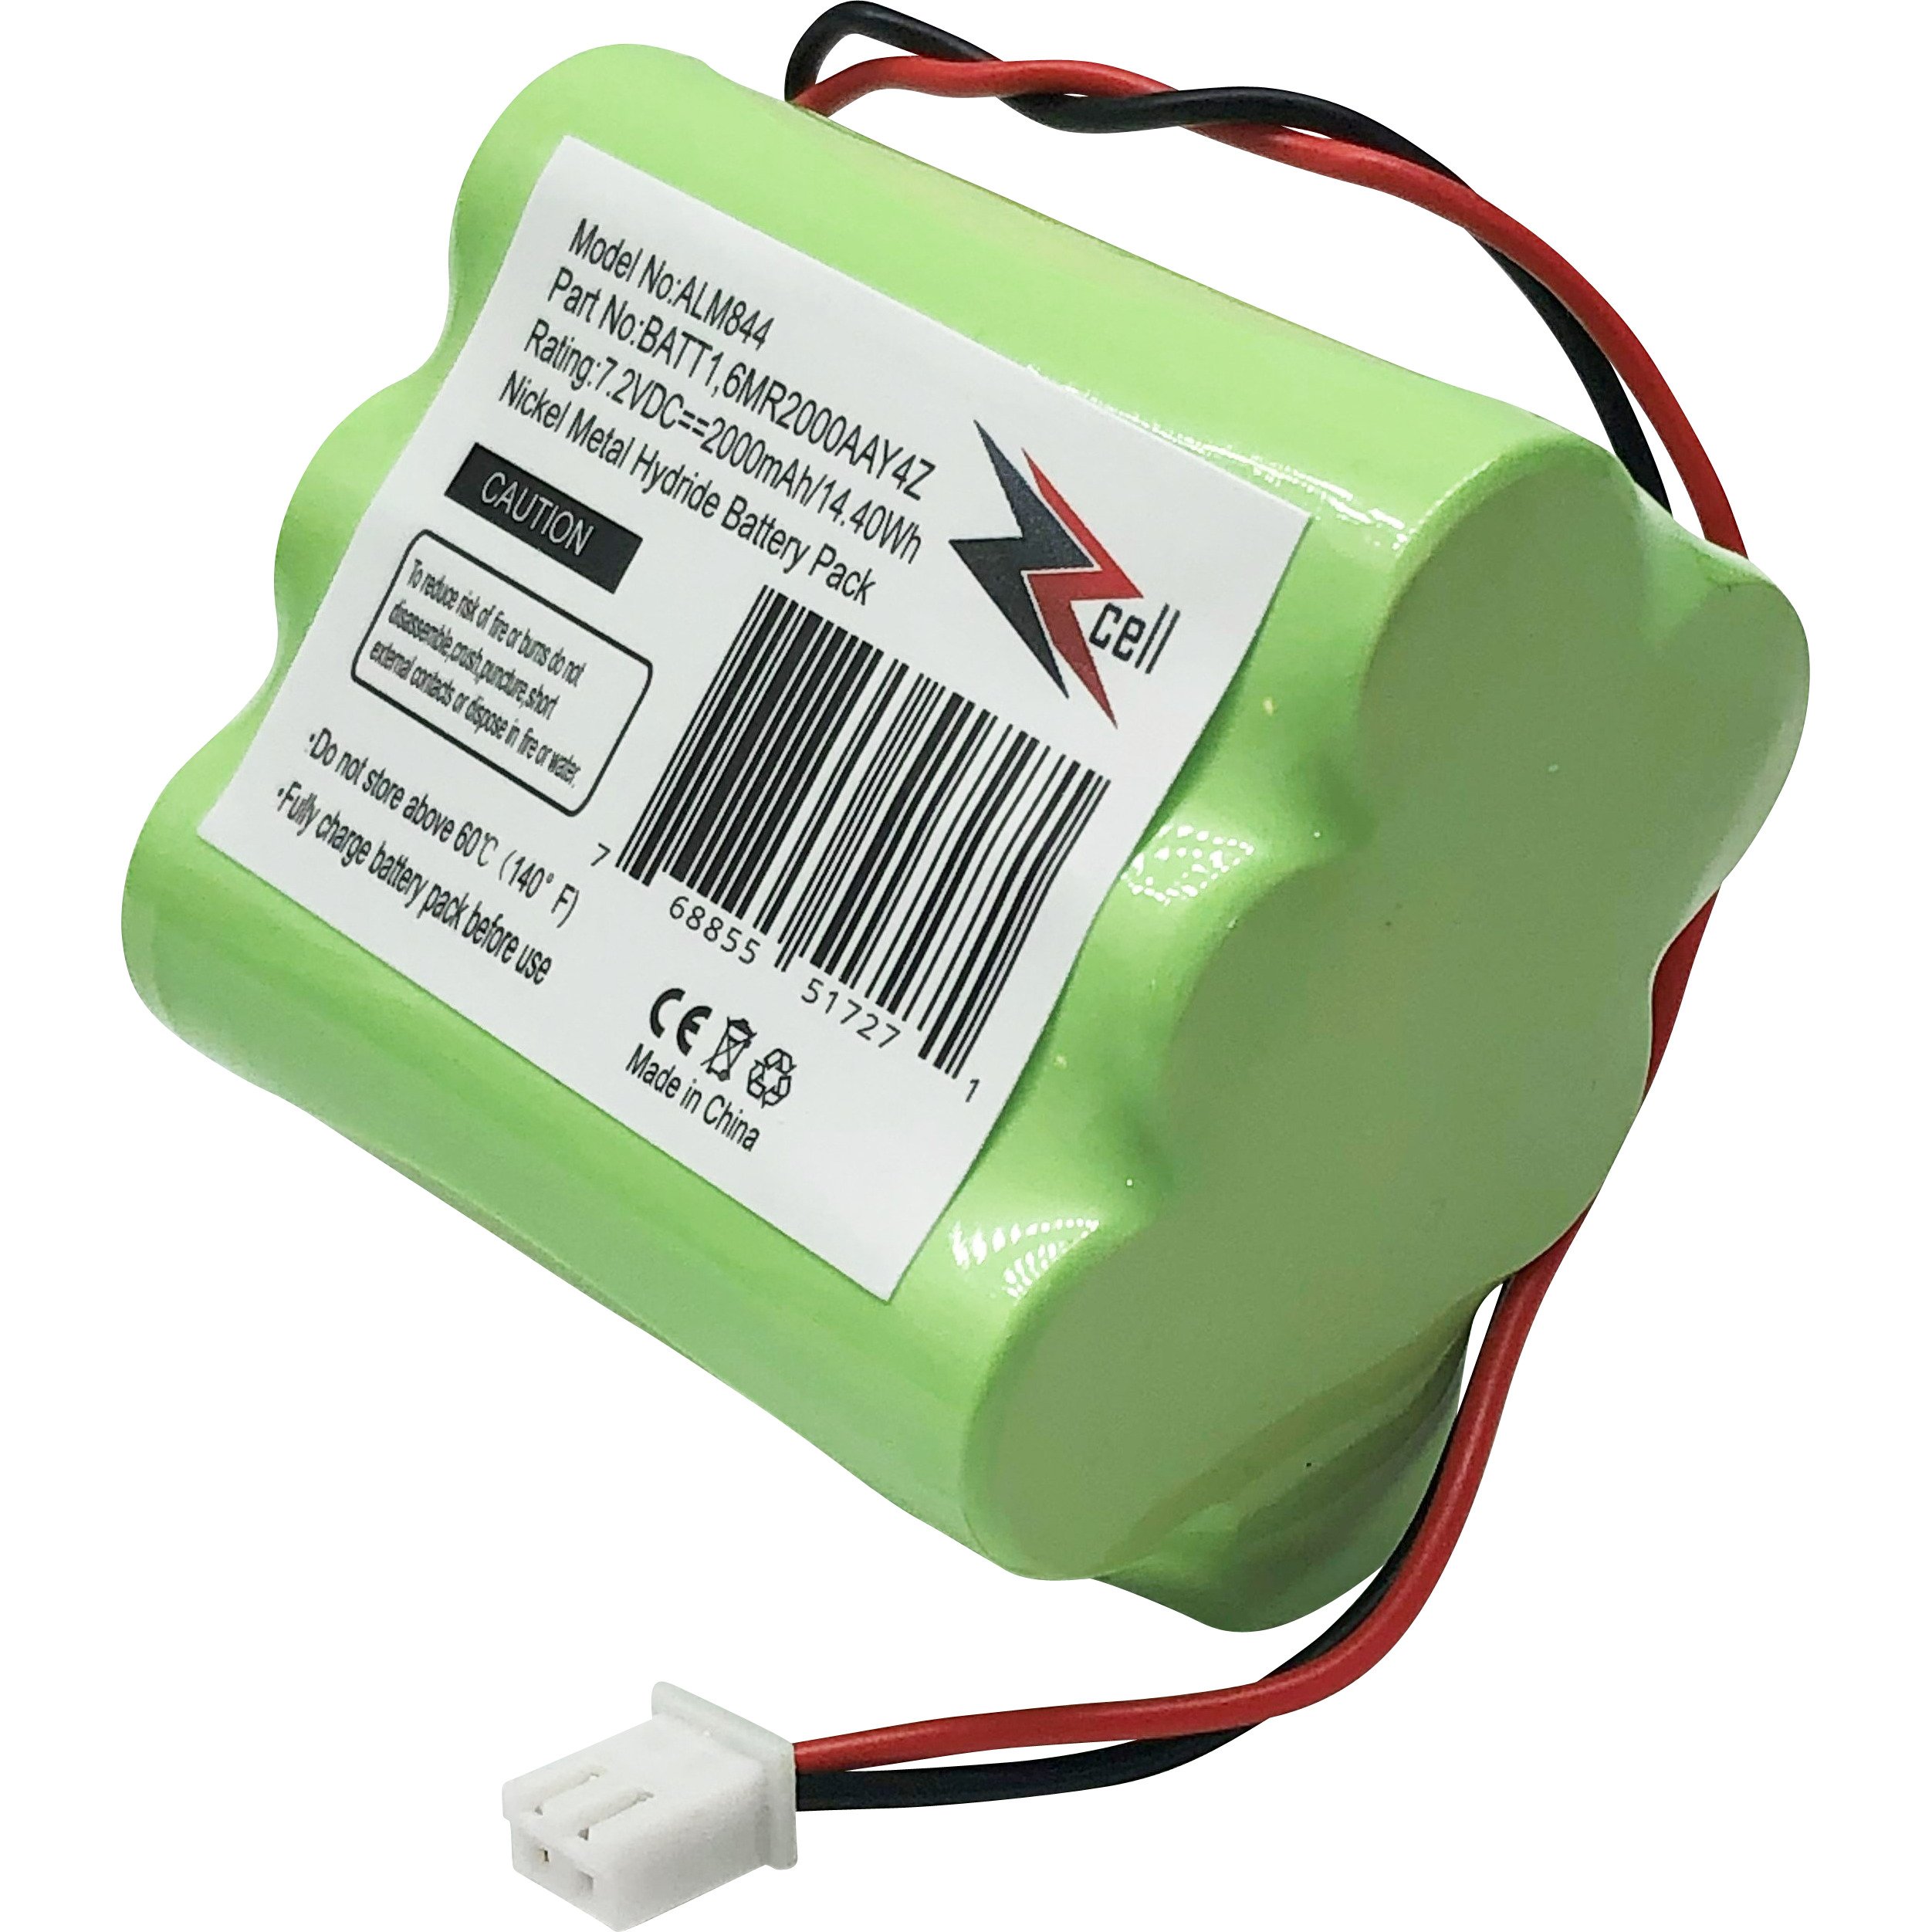 ZZcell Replacement Battery For 2Gig BATT1, BATT1X, BATT2X, 6MR2000AAY4Z, GC2 2GIG-CNTRL2 2GIG-CP2, GCKIT311, 228844, Go Control Panel Alarm System 10-000013-001, PERS-4200 - image 3 of 6